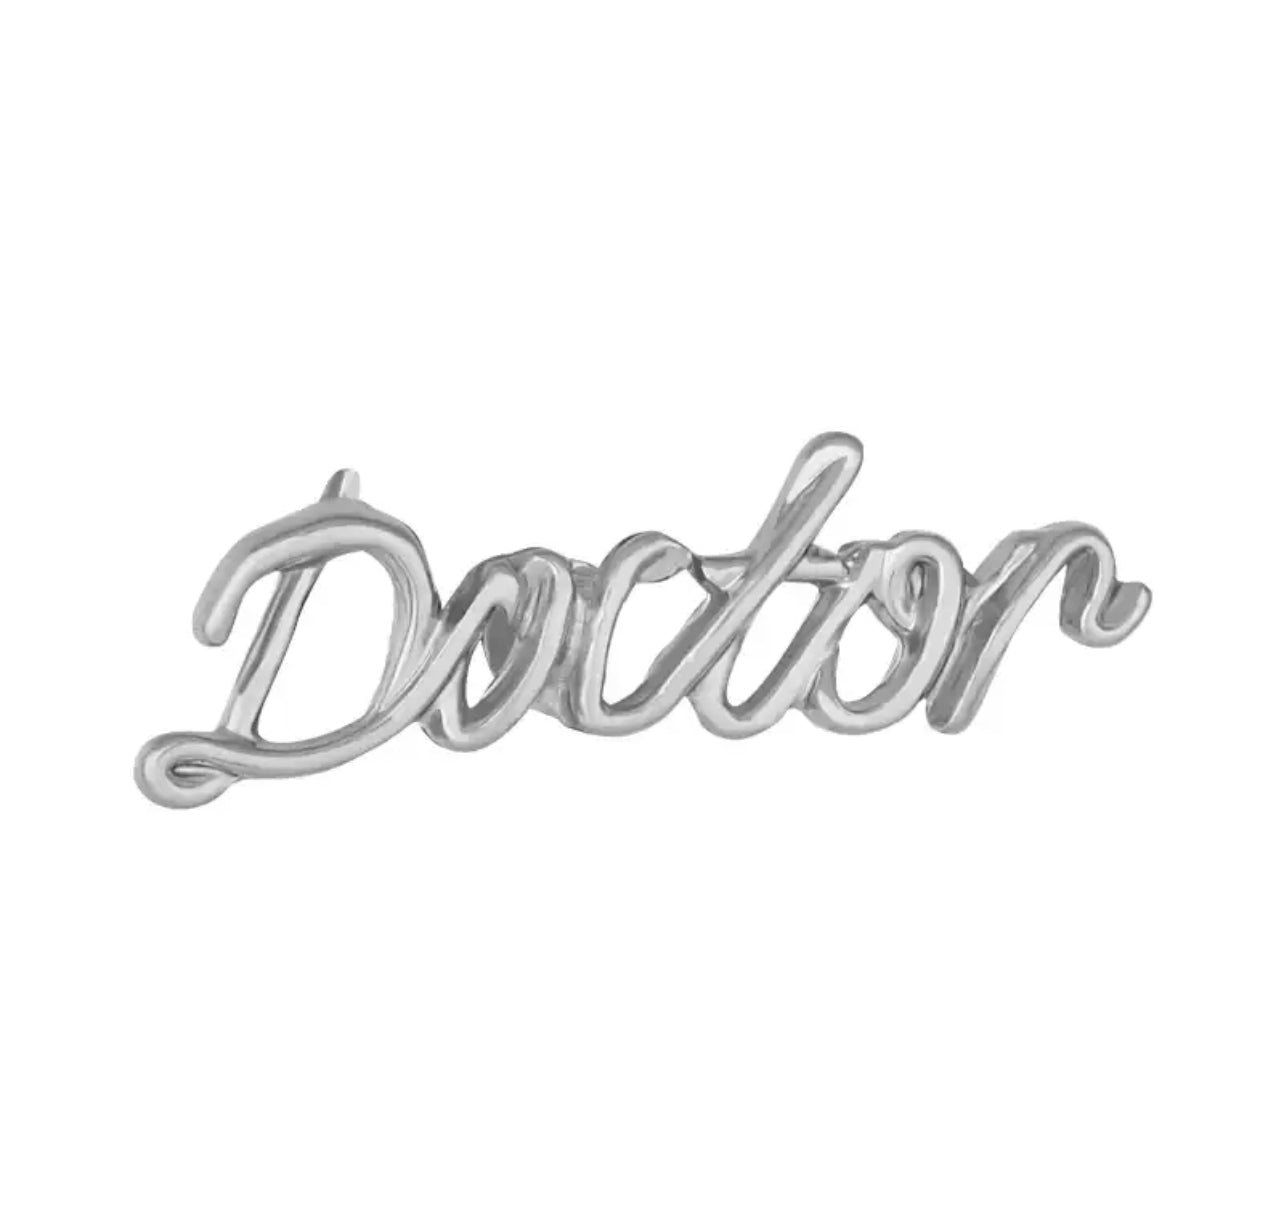 Just doctor!